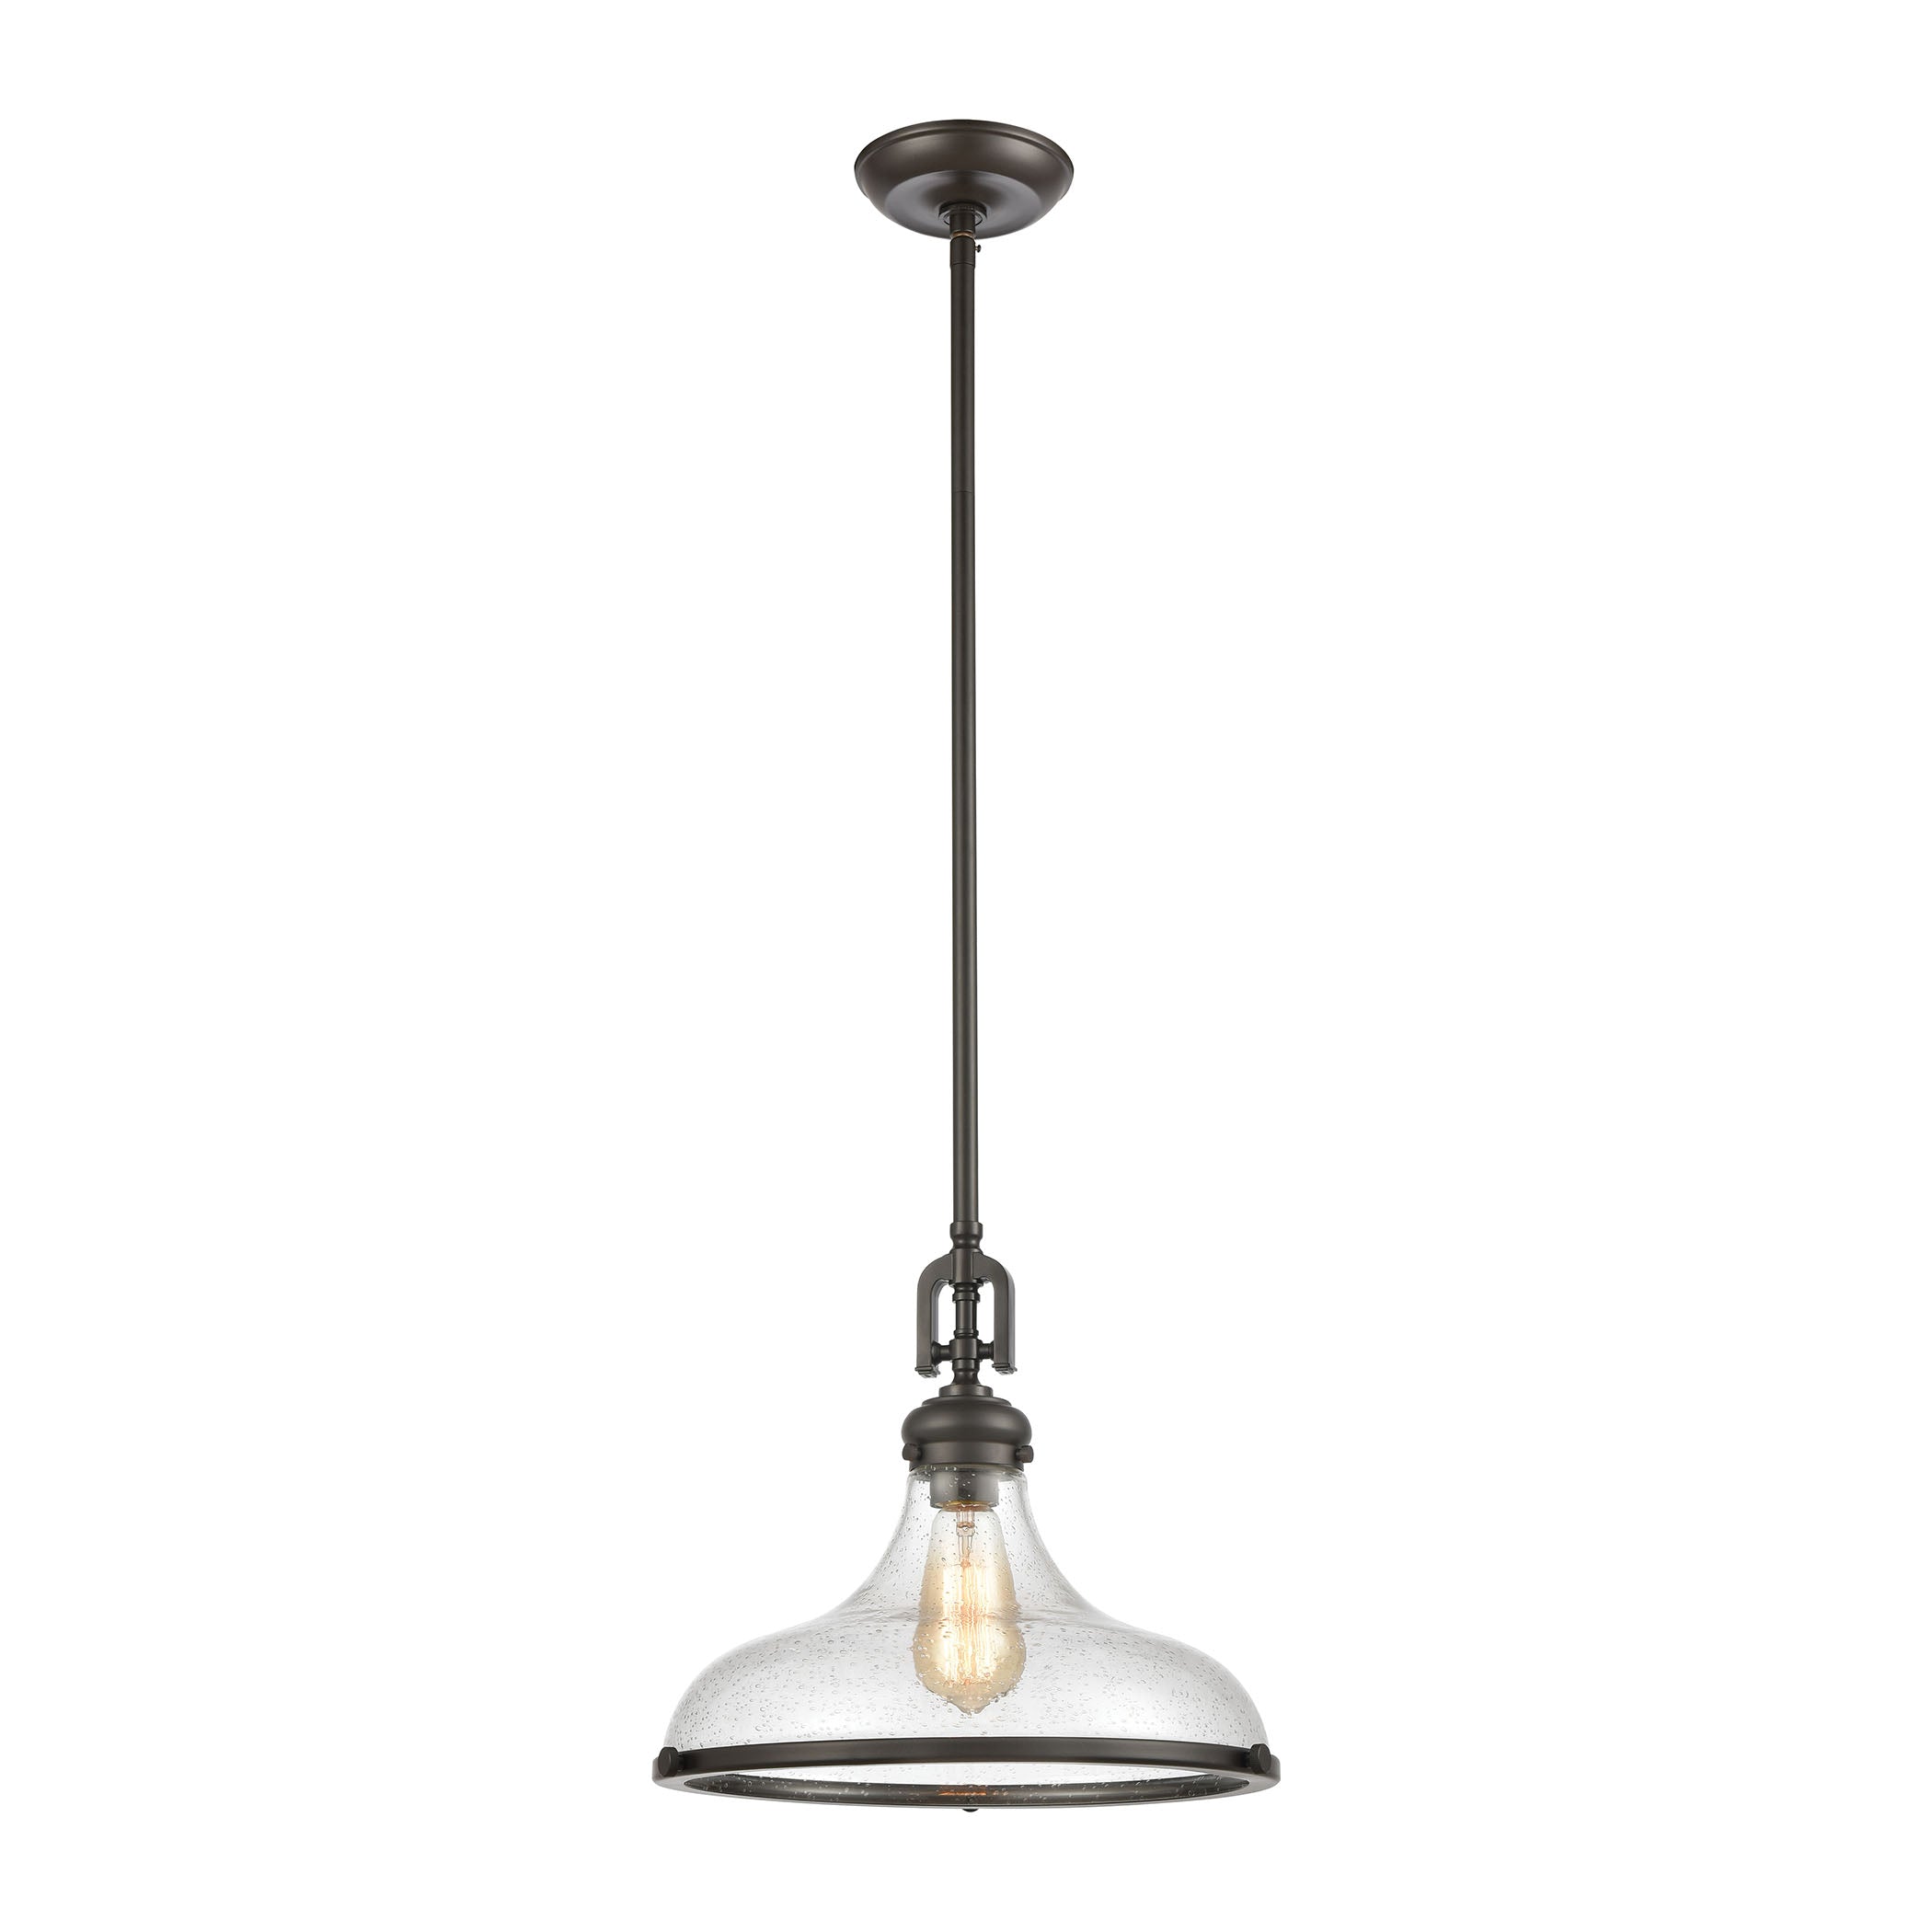 ELK Lighting 57361/1 Rutherford 1-Light Pendant in Oil Rubbed Bronze with Seedy Glass